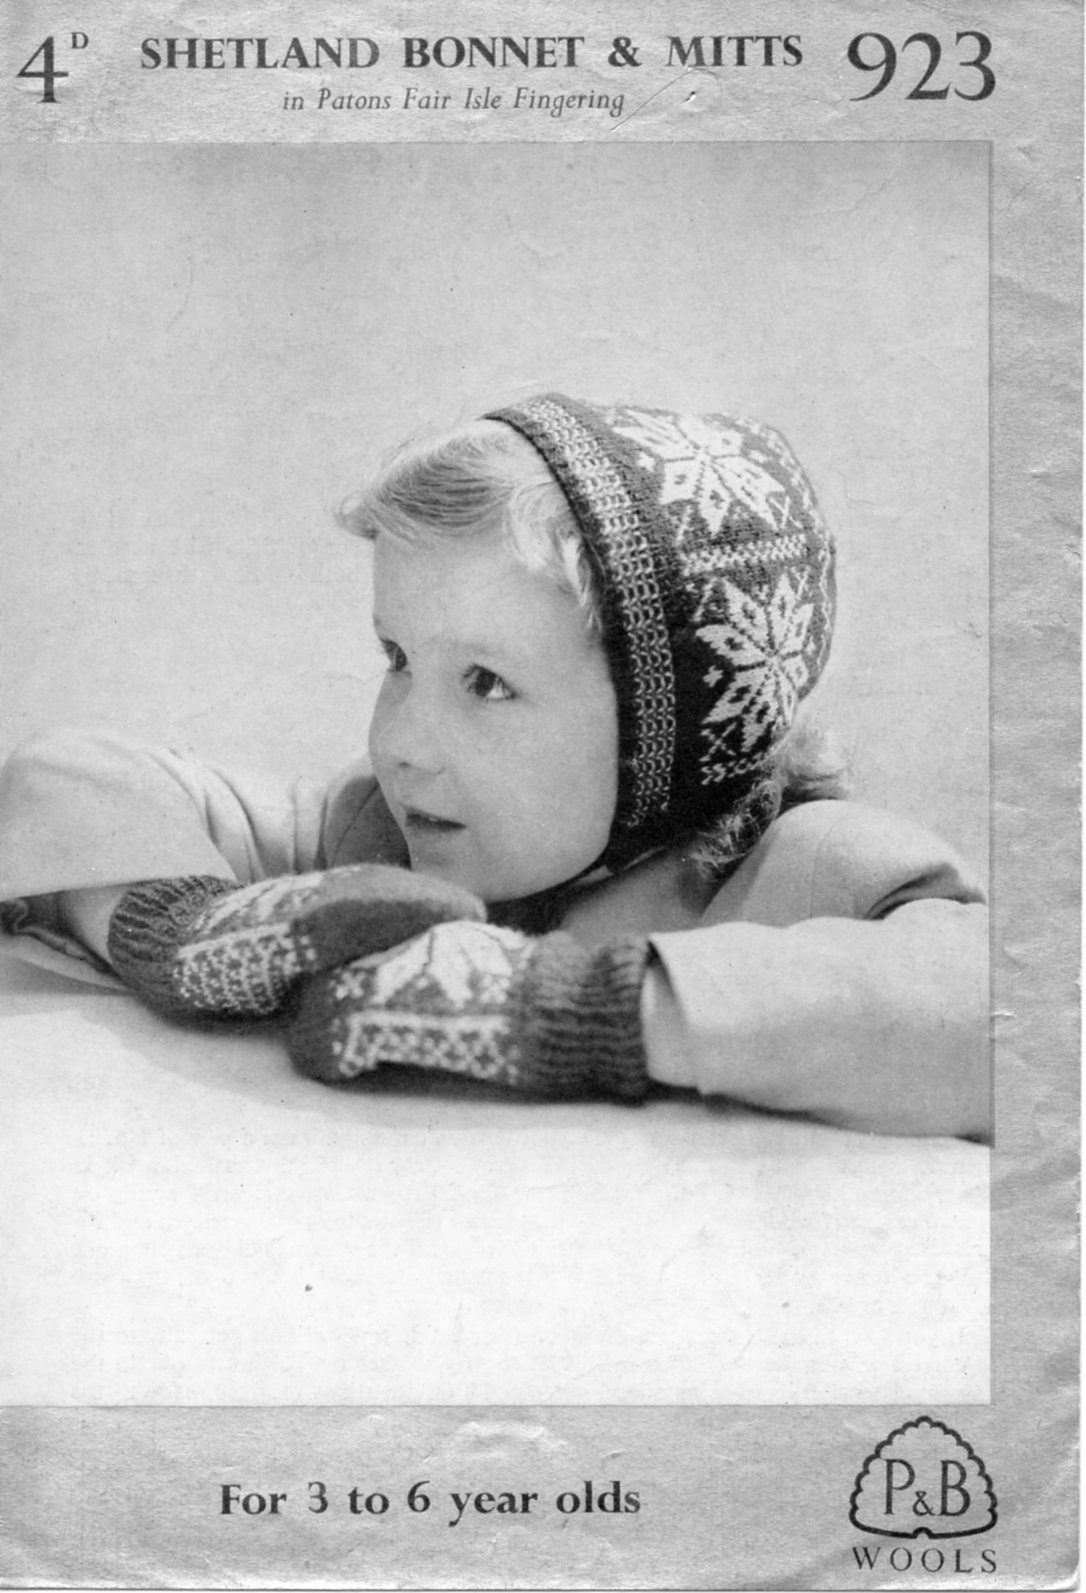 Young child wearing bonnet and mittens in Fair Isle star pattern